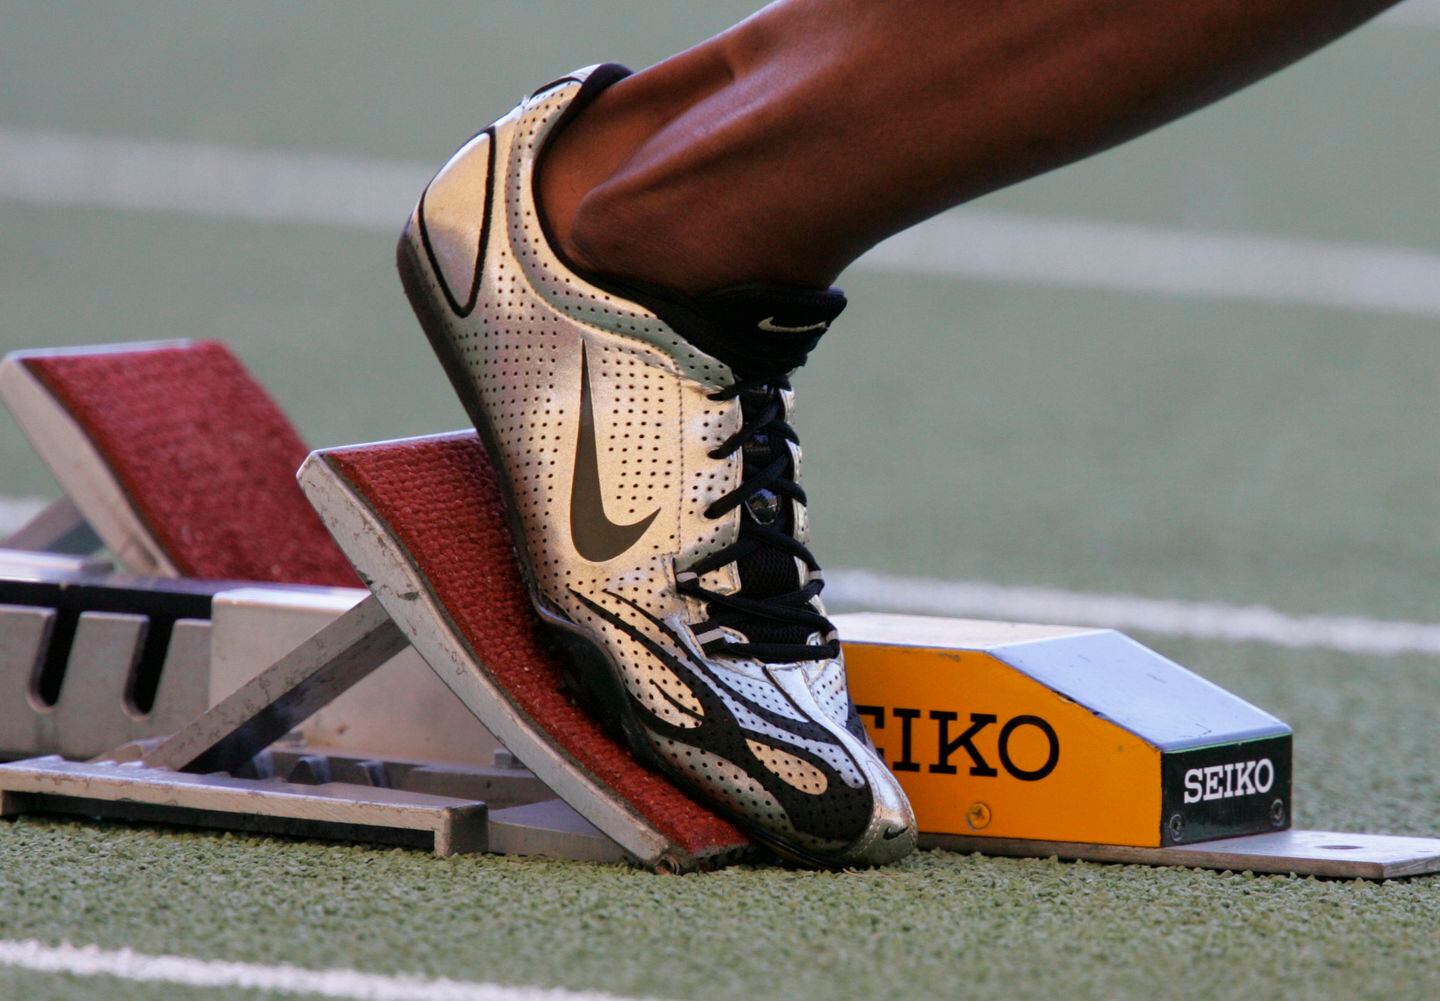 Desear Engreído siesta More than shoes: Nike navigates complicated twists in track - OPB